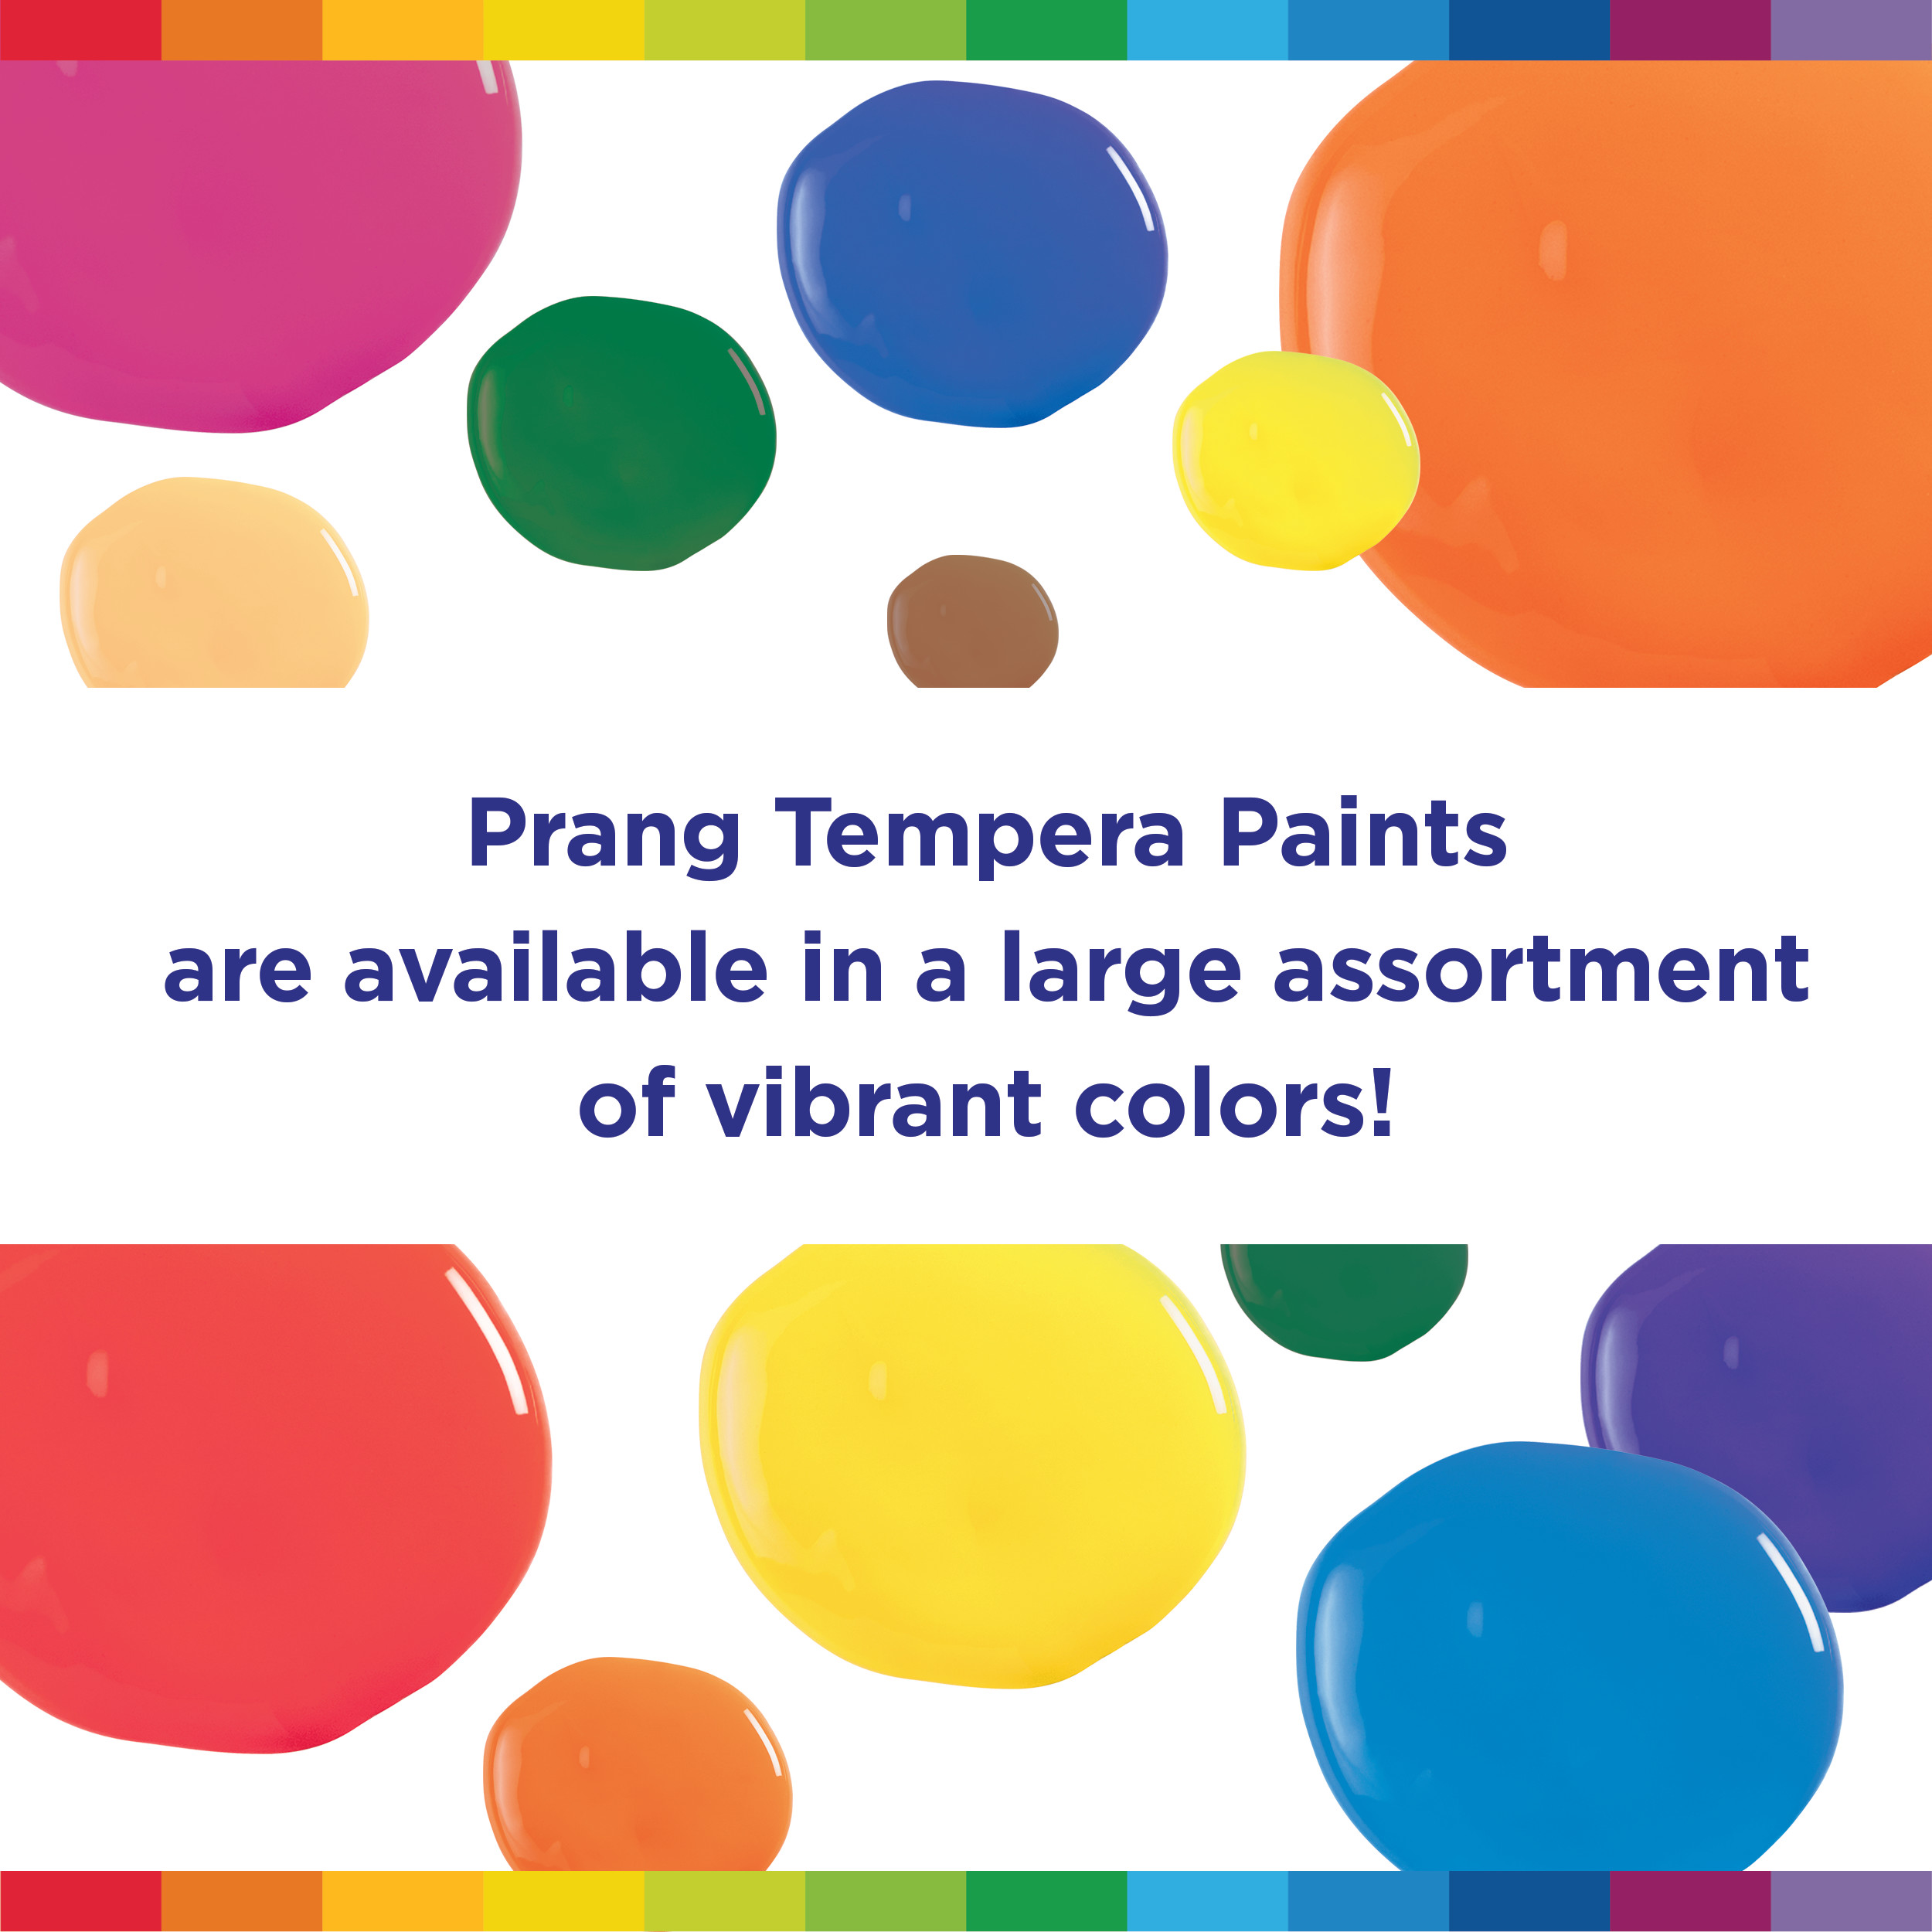 Prang Ready-to-Use Washable Tempera Paint - 8 fl oz - 1 Each